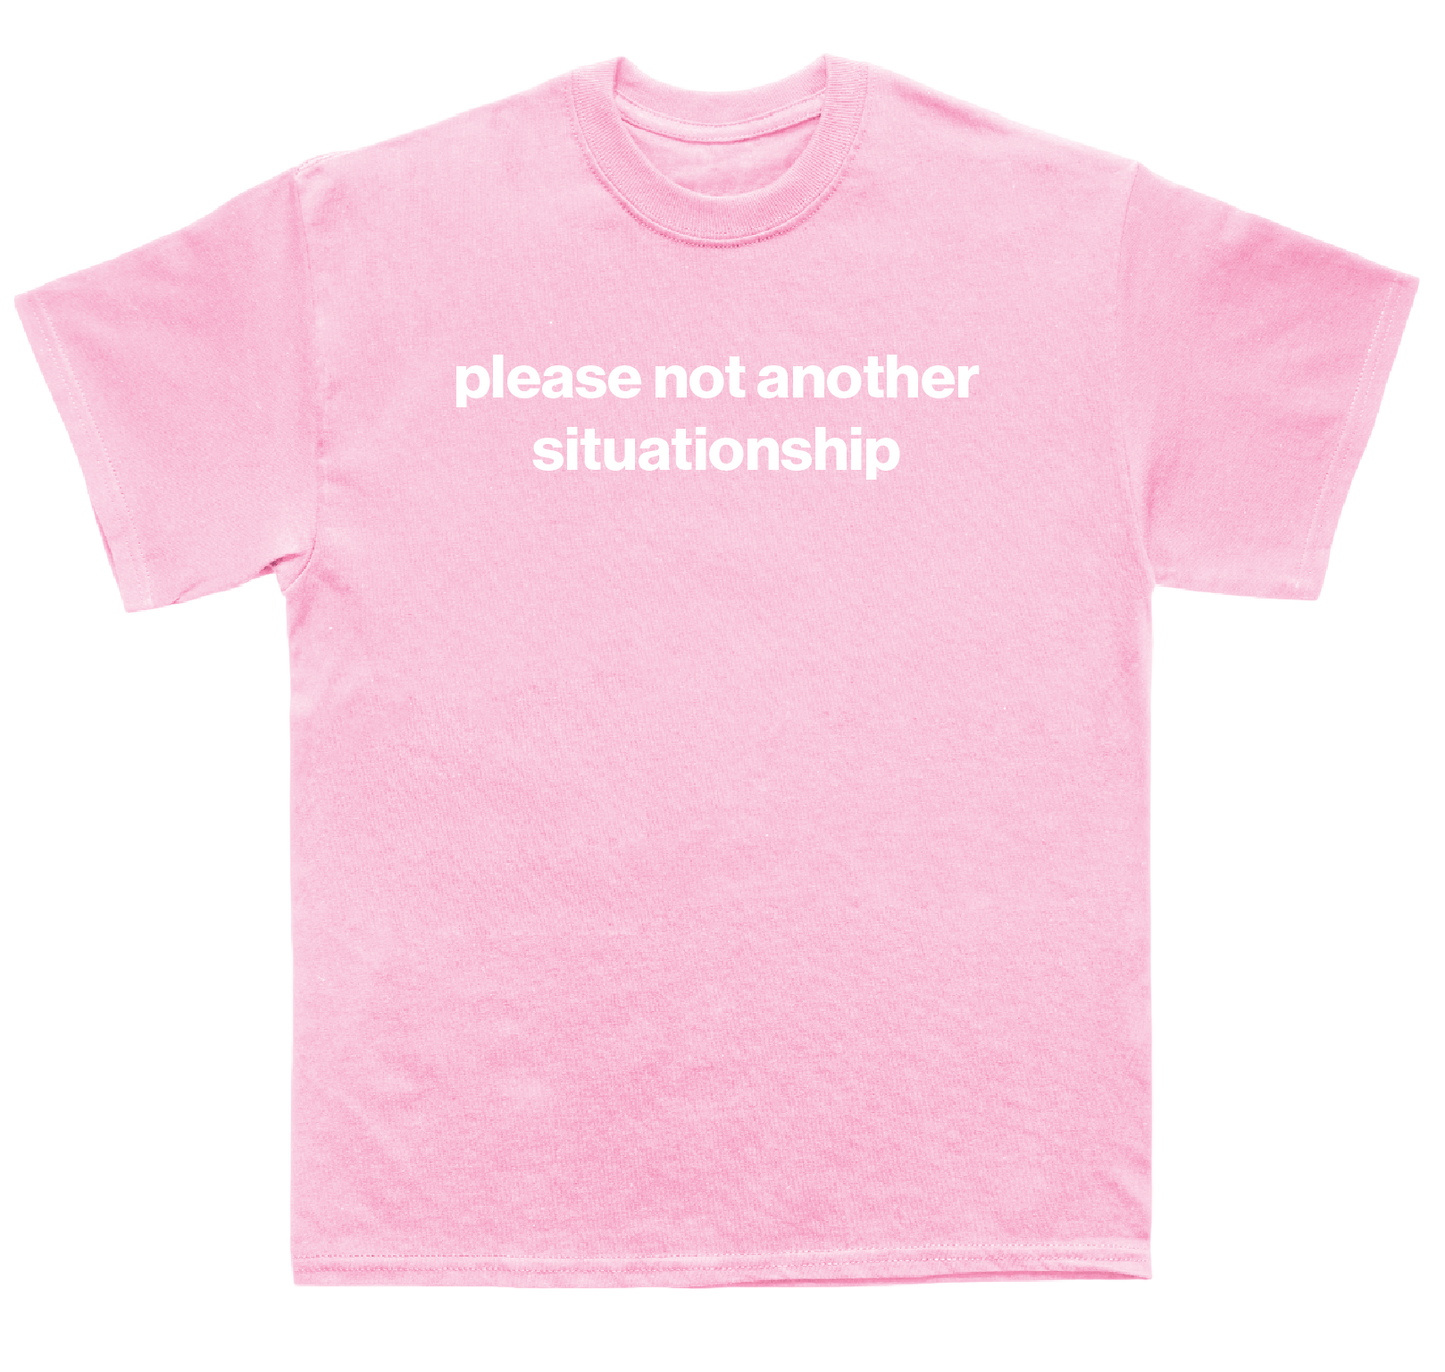 please not another situationship shirt